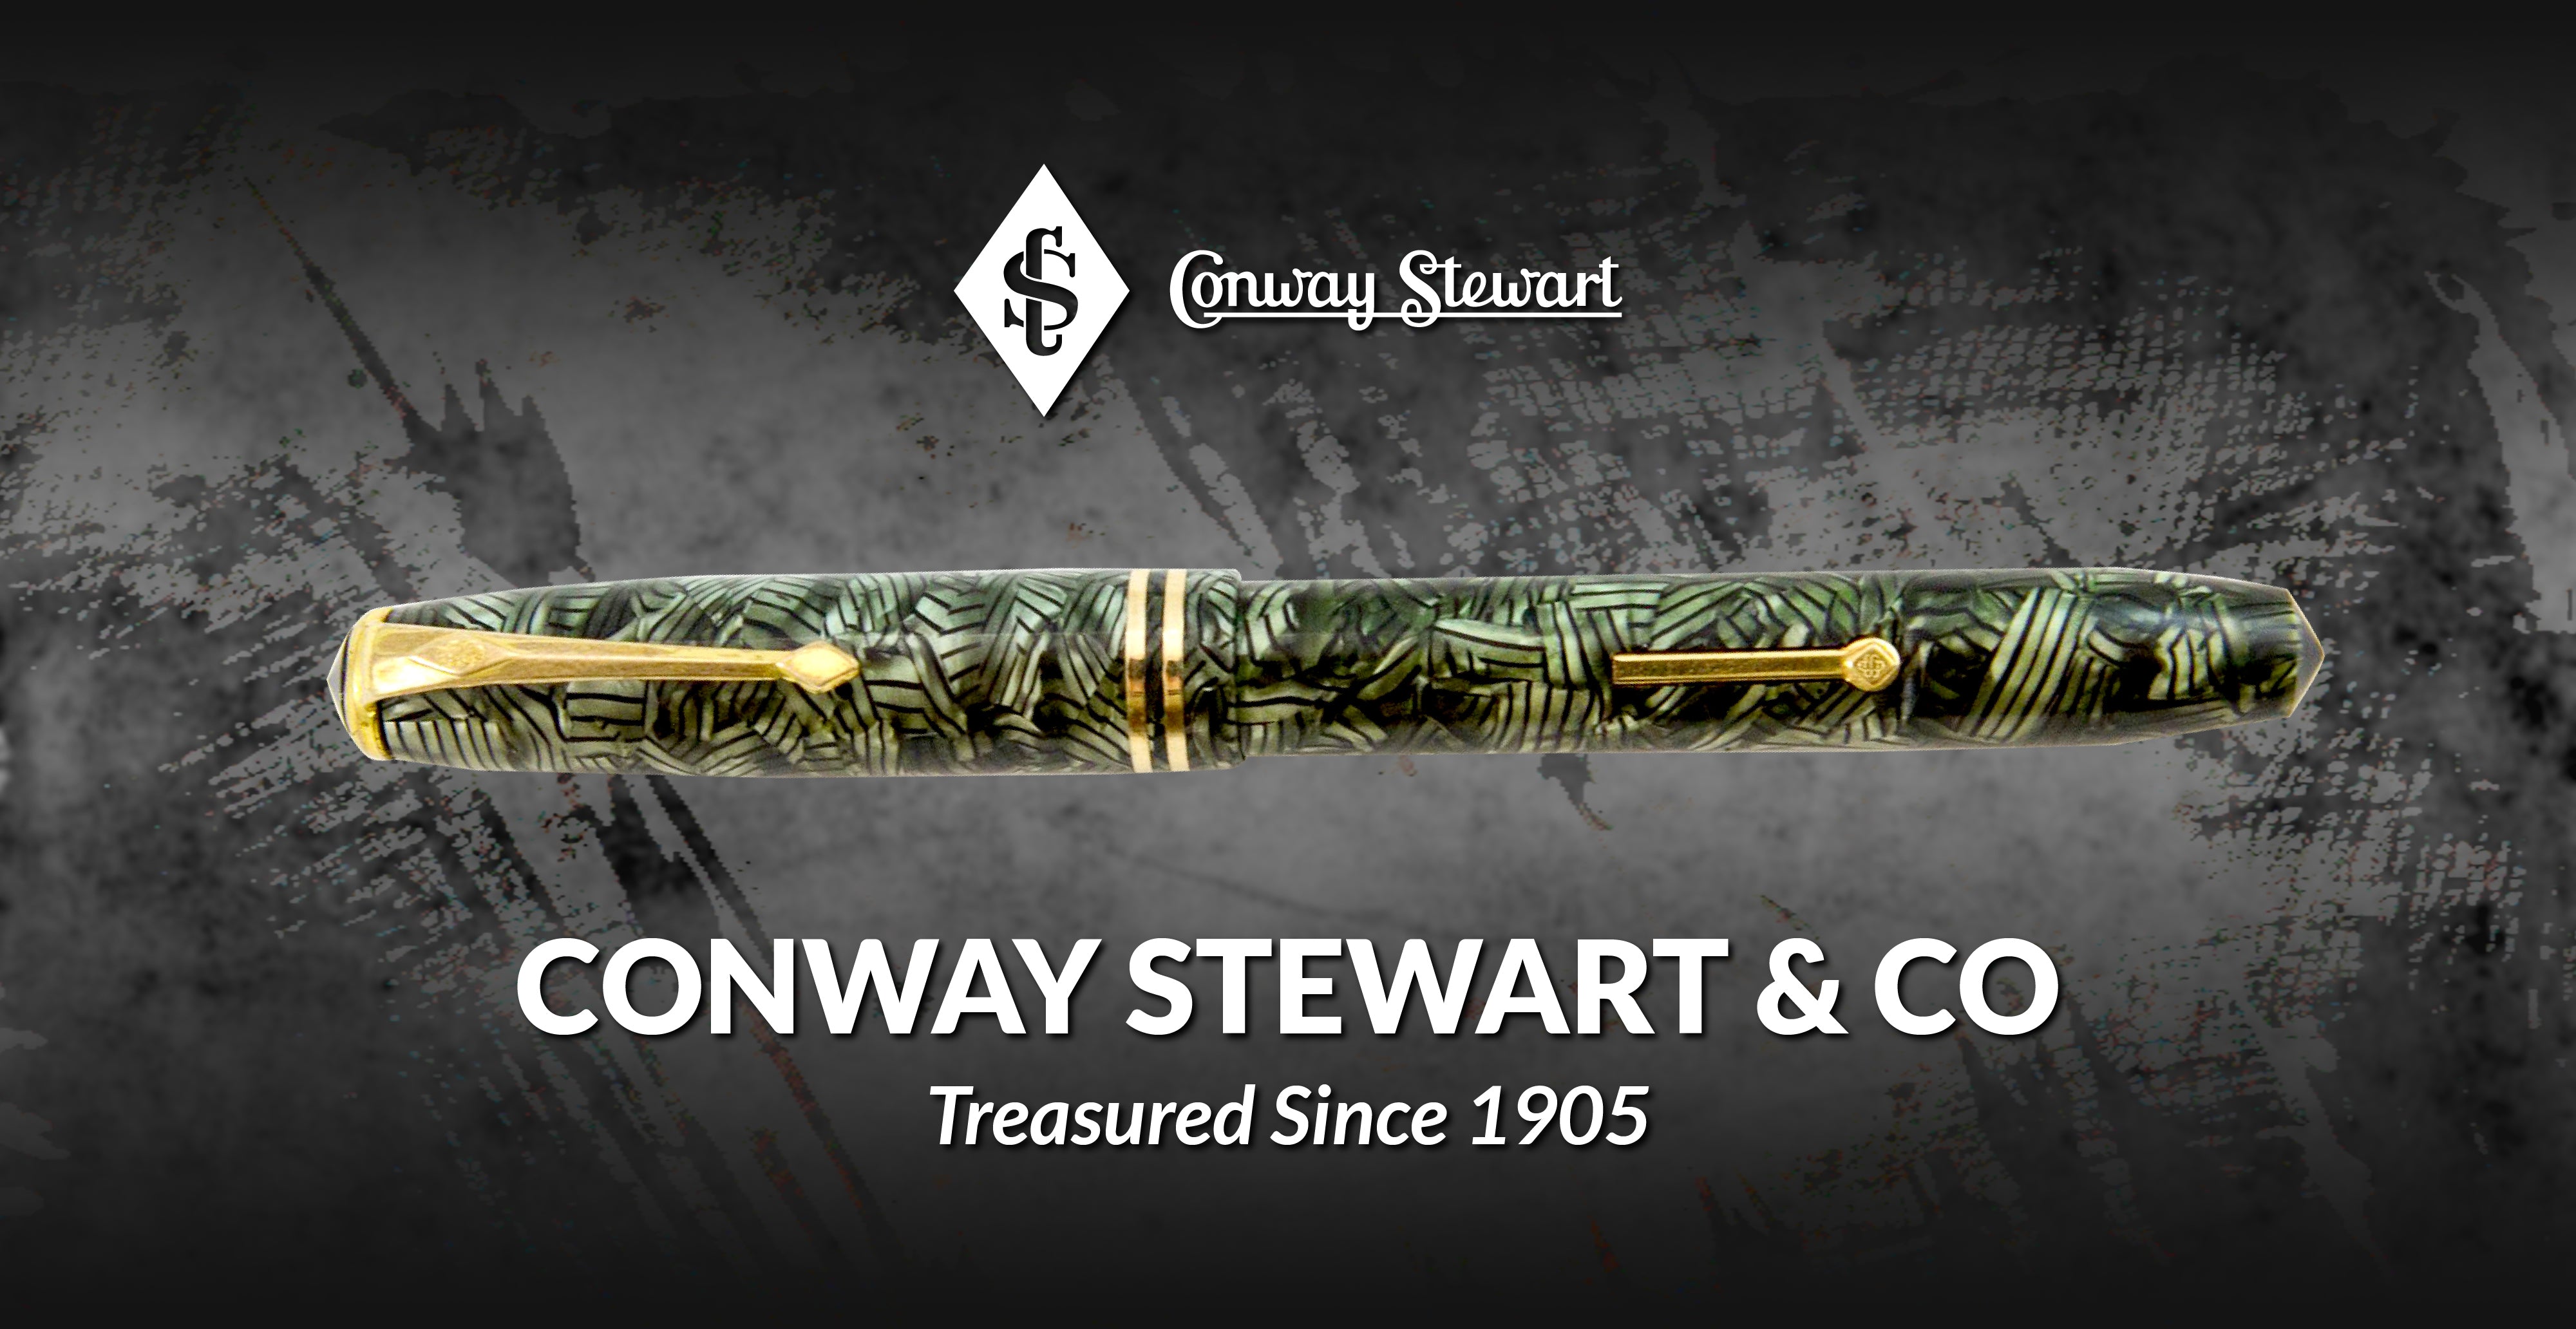 The History of Conway Stewart – Conway Stewart